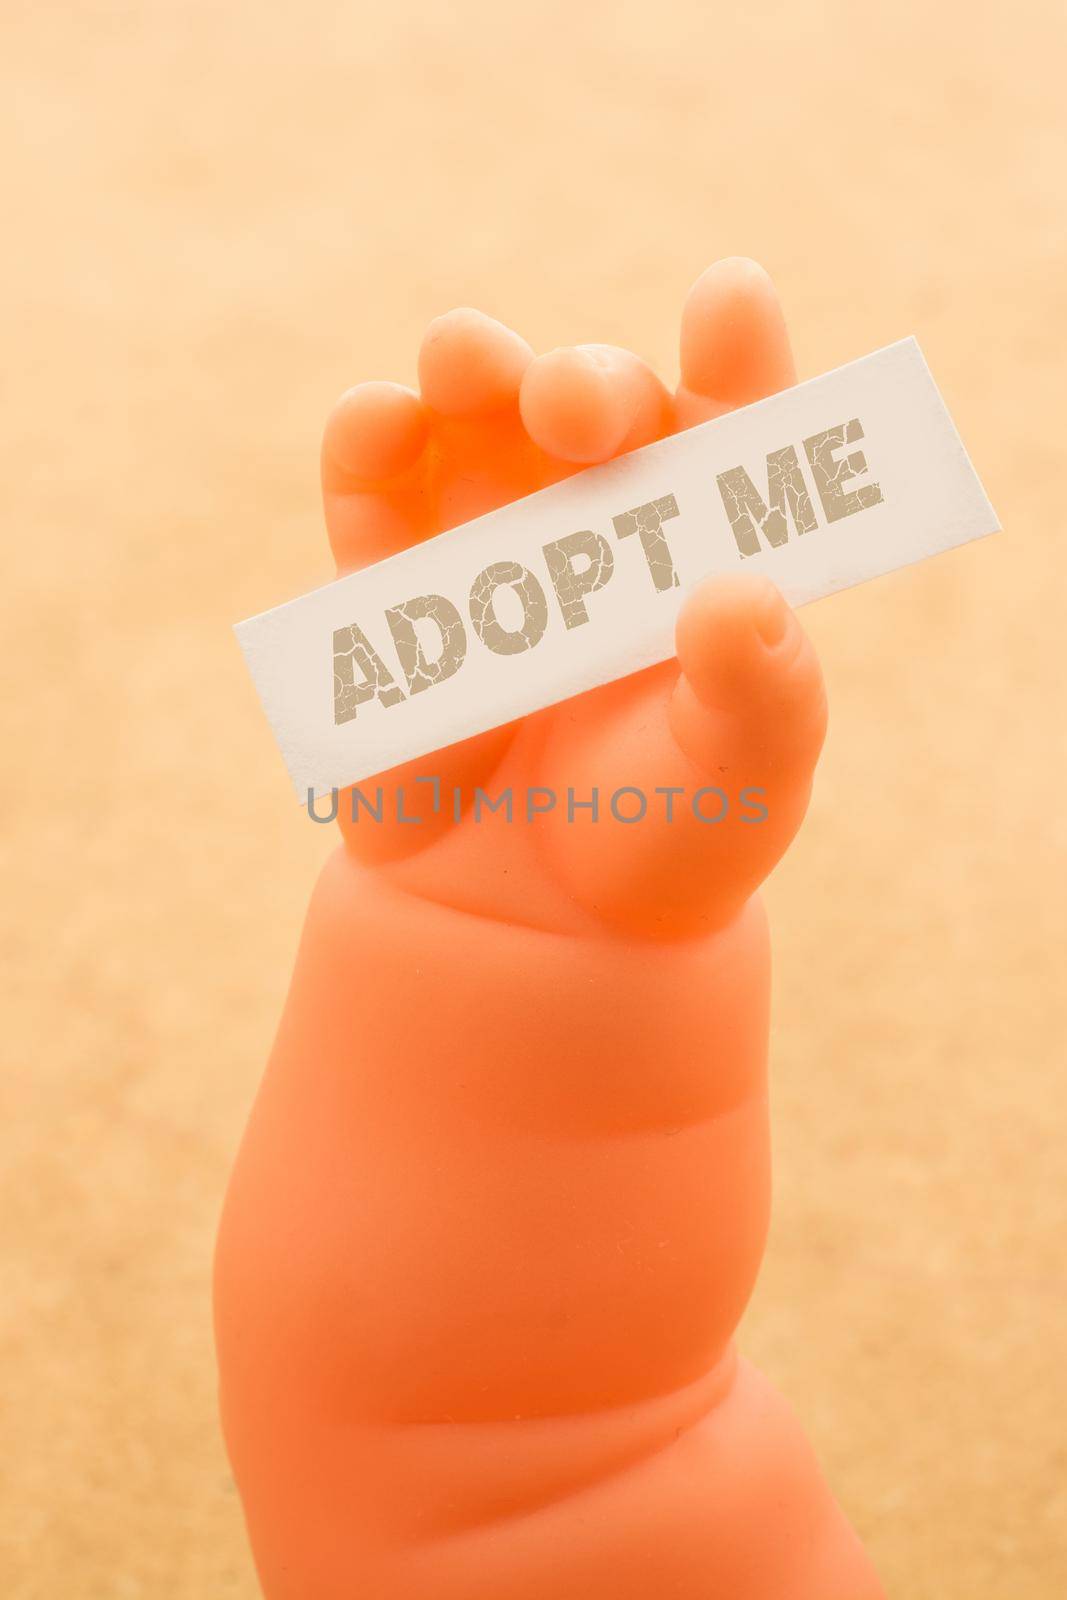 Toy doll hand holding paper with ADOPT ME wording